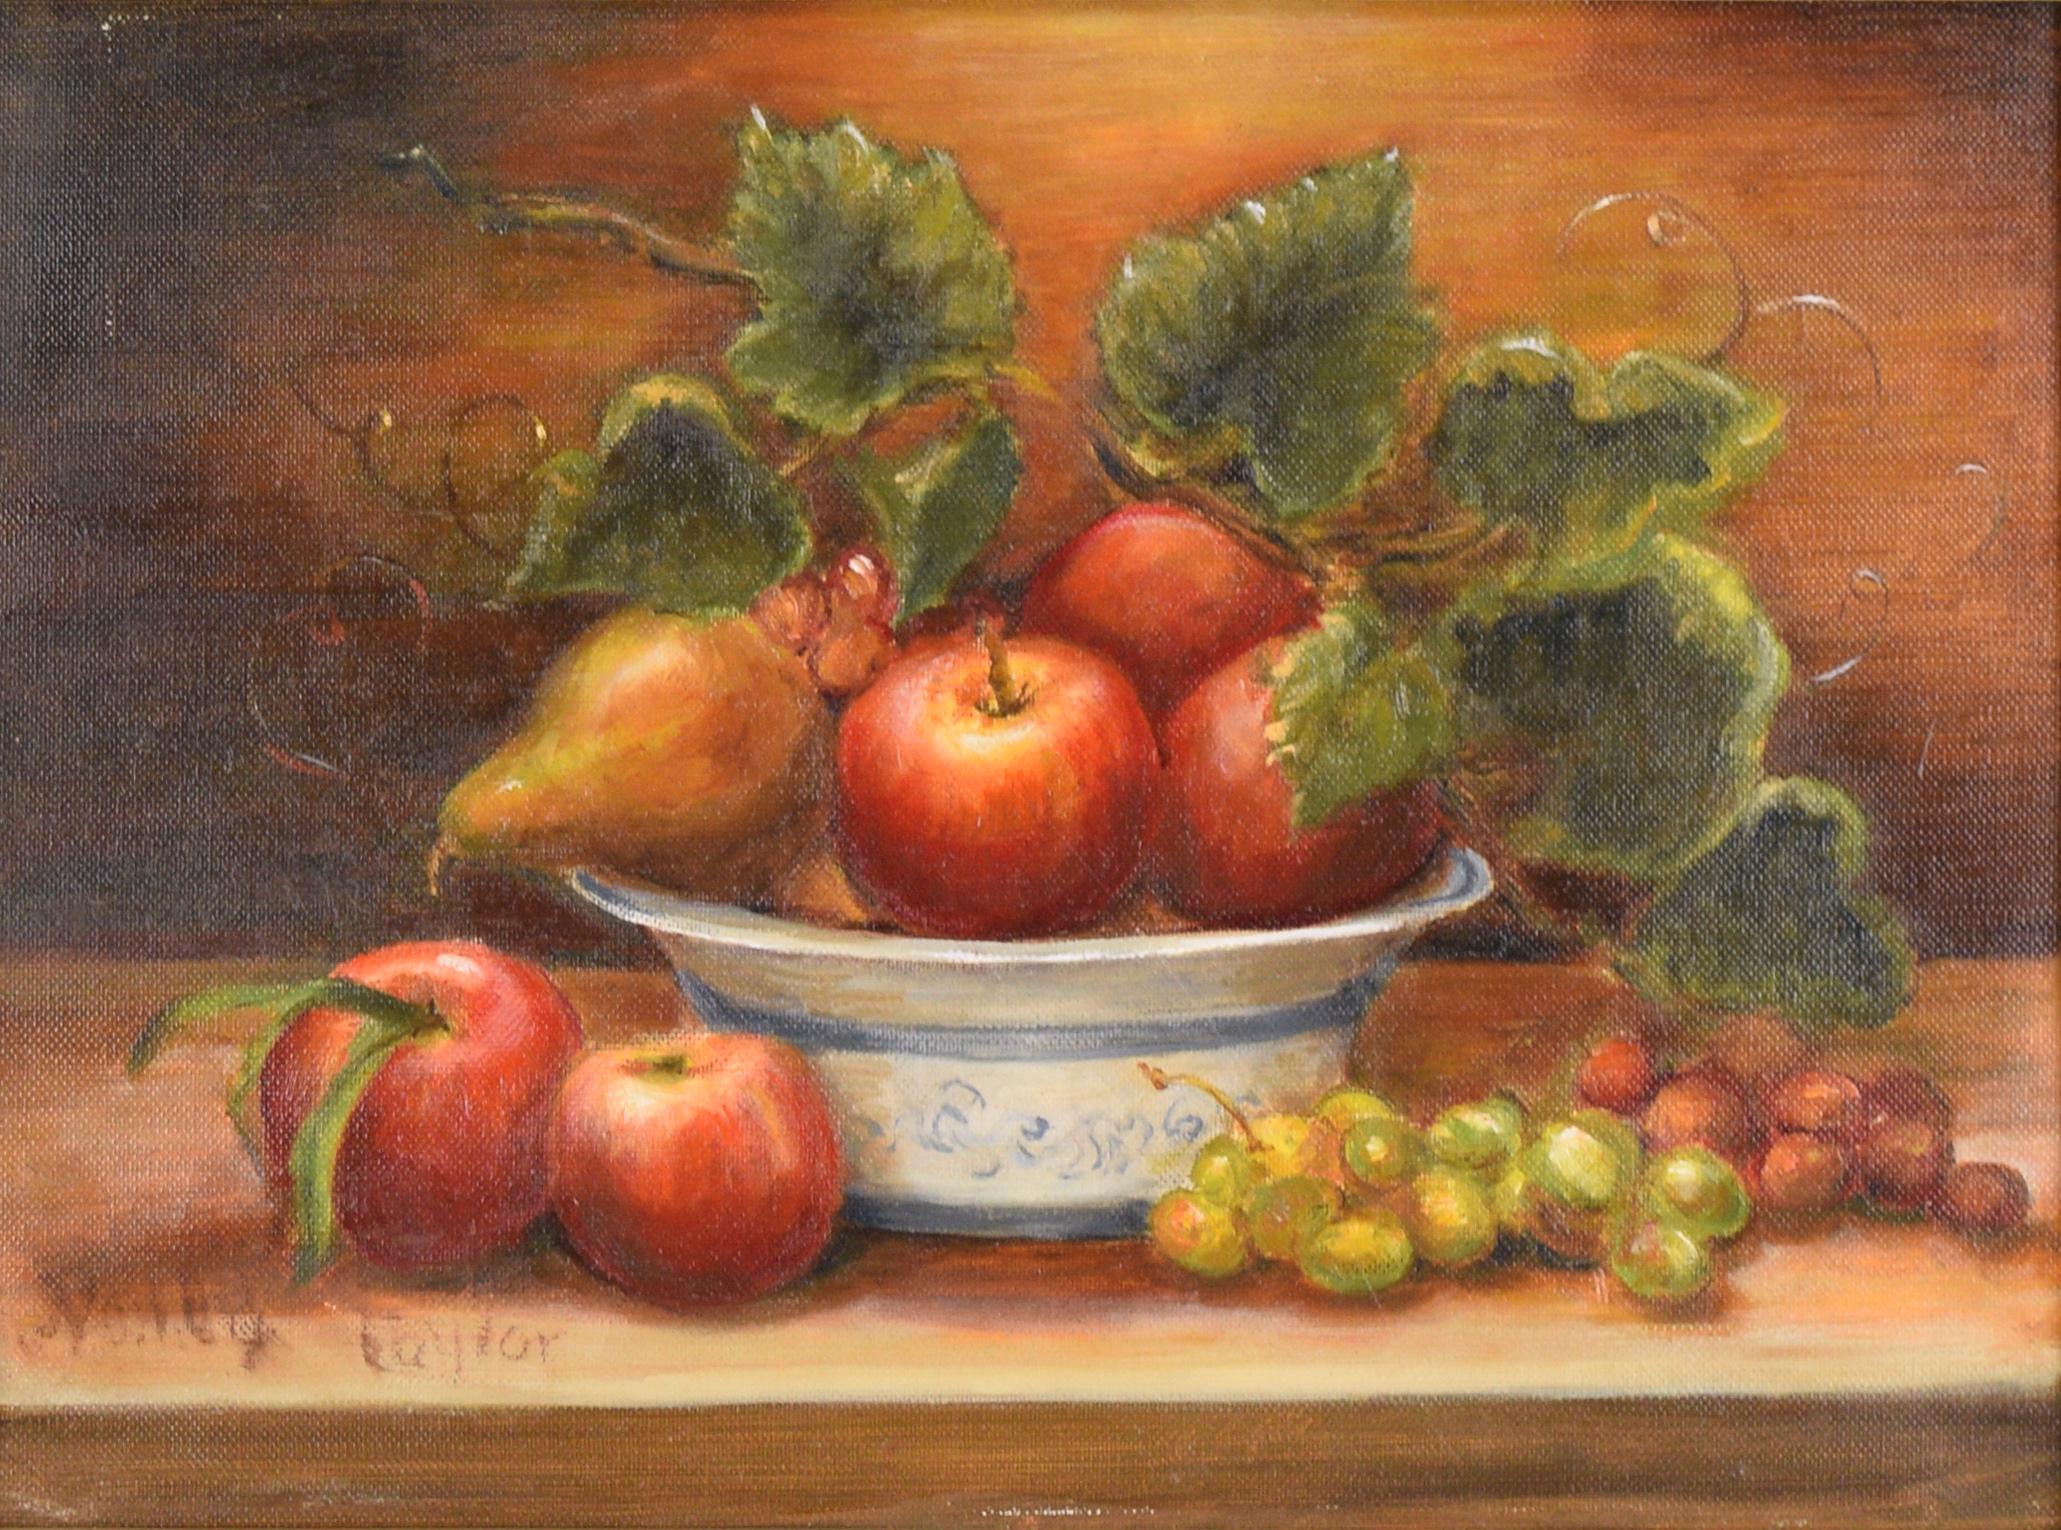 Nature morte « Apples, Grapes, and Pears » - Painting de Nancy Taylor